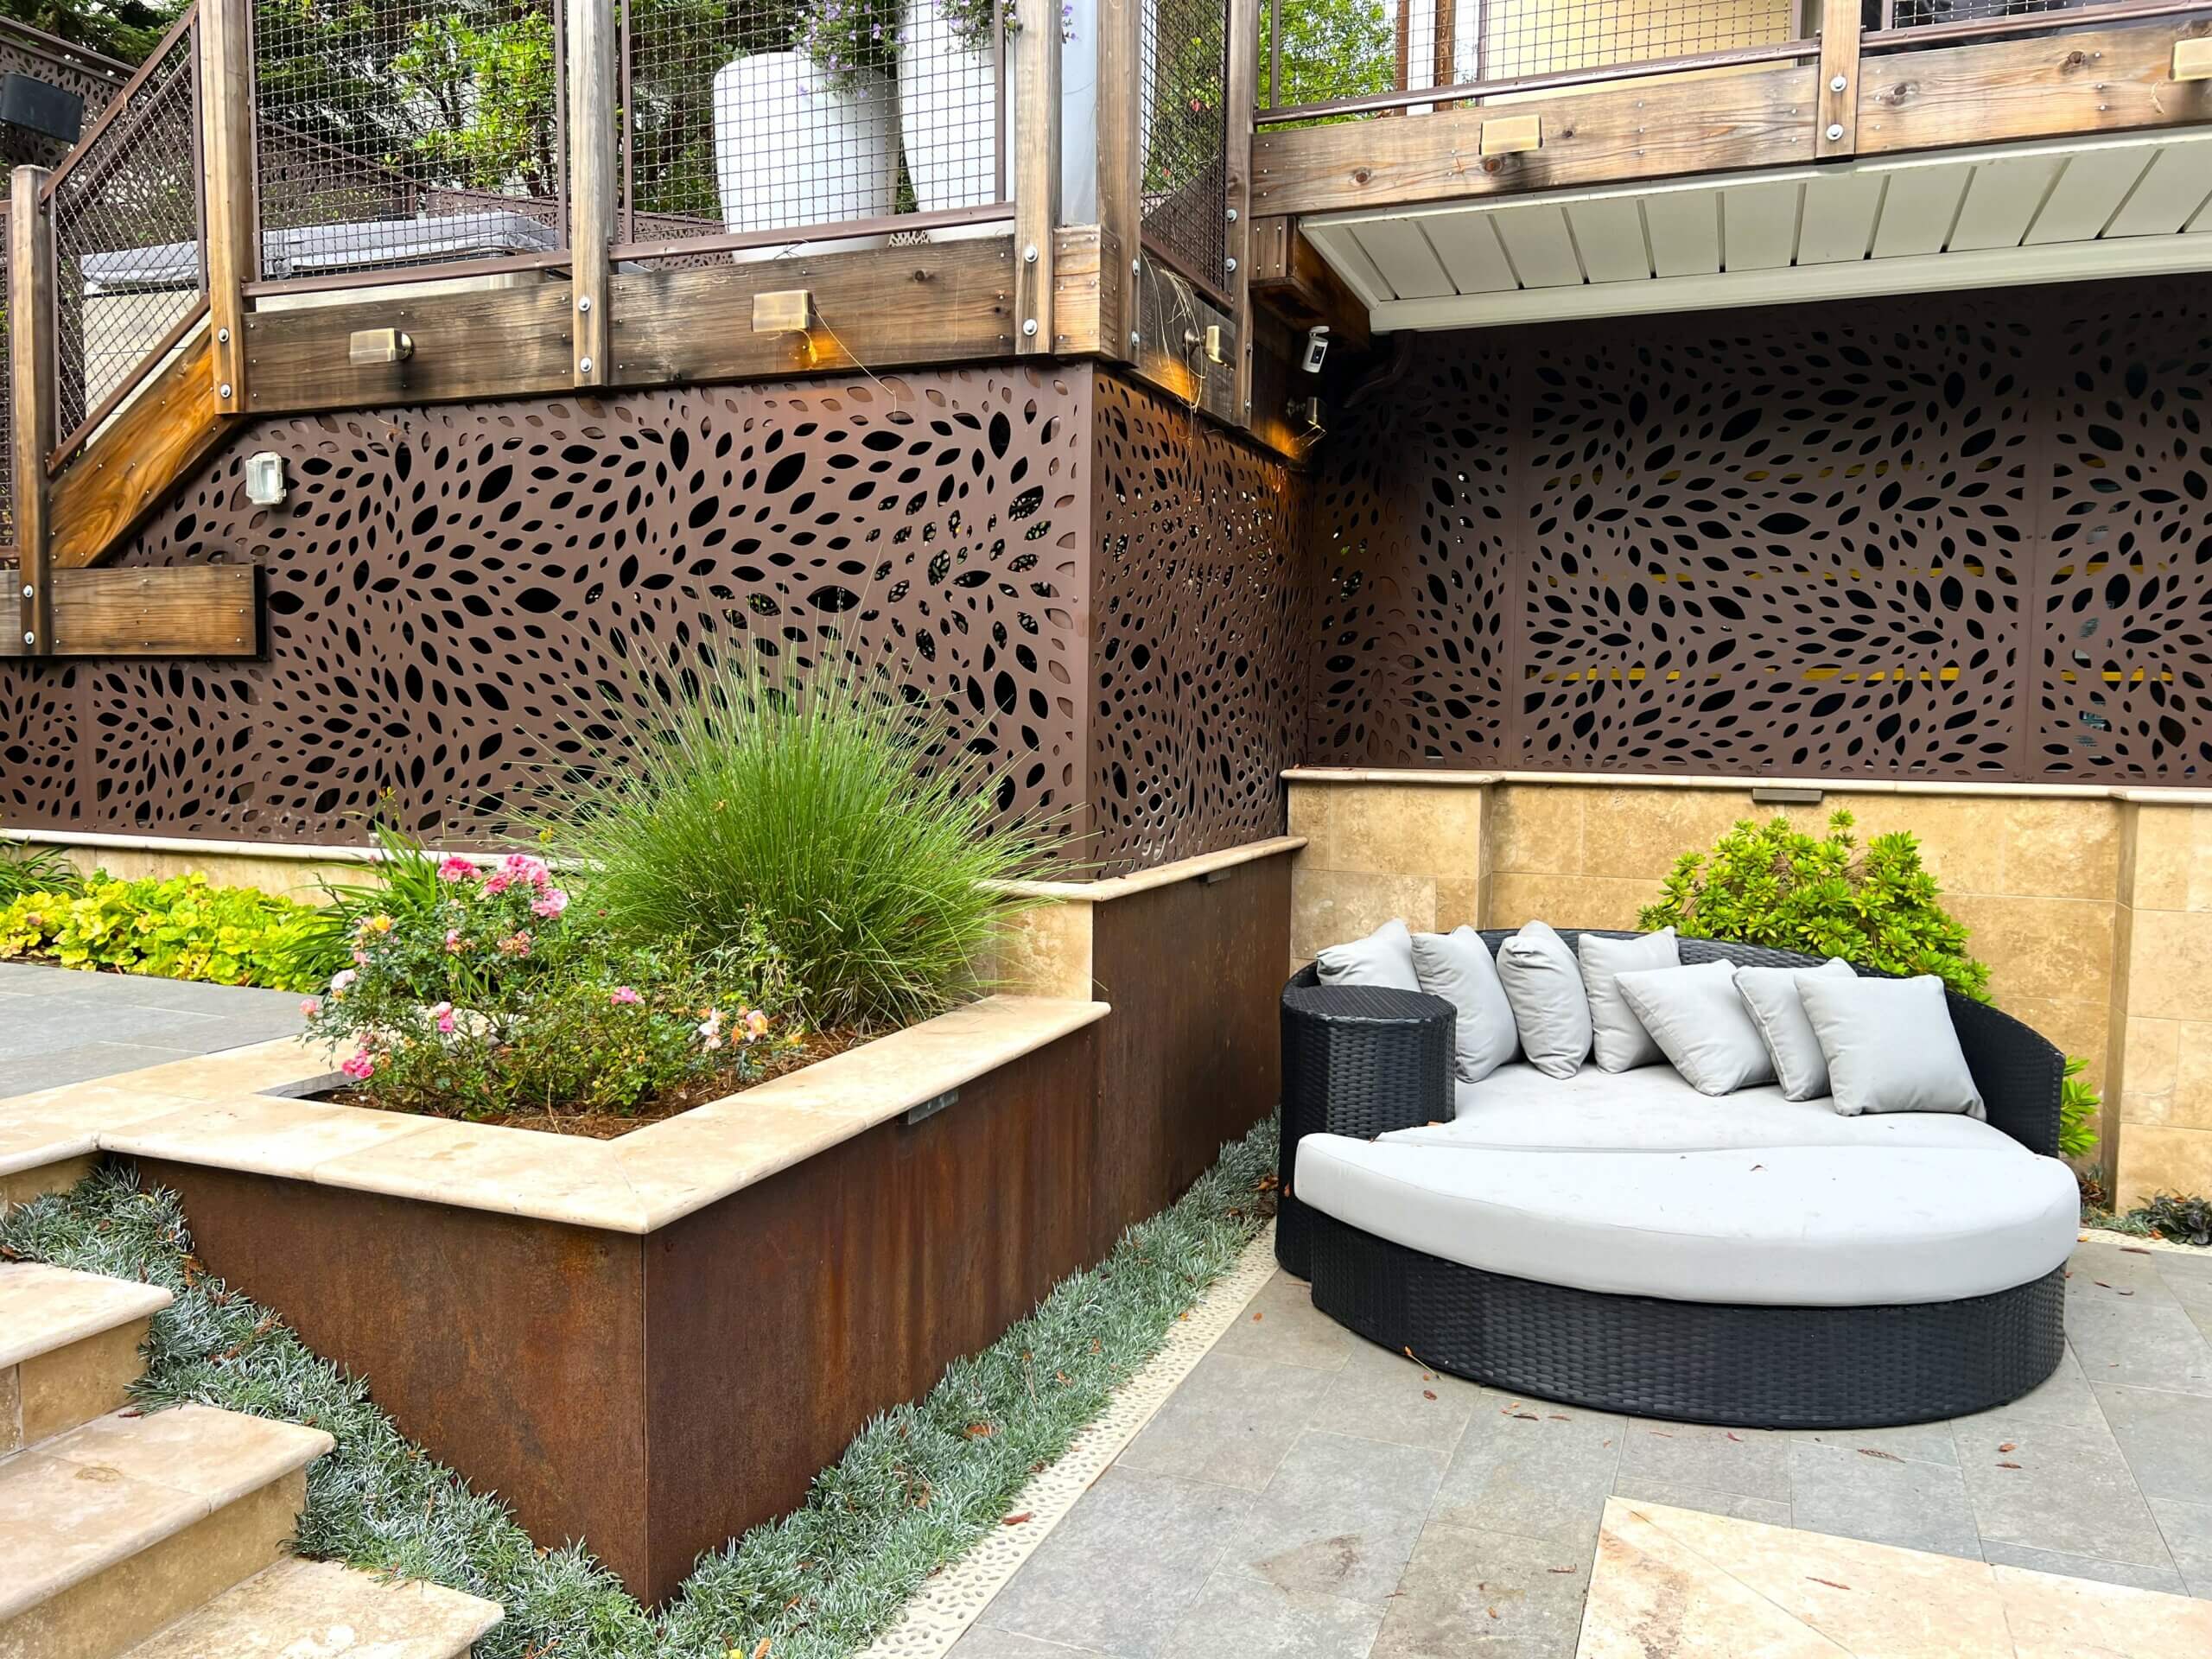 Complementary metal features in backyard landscape showing stamped metal screens and metal encased planter